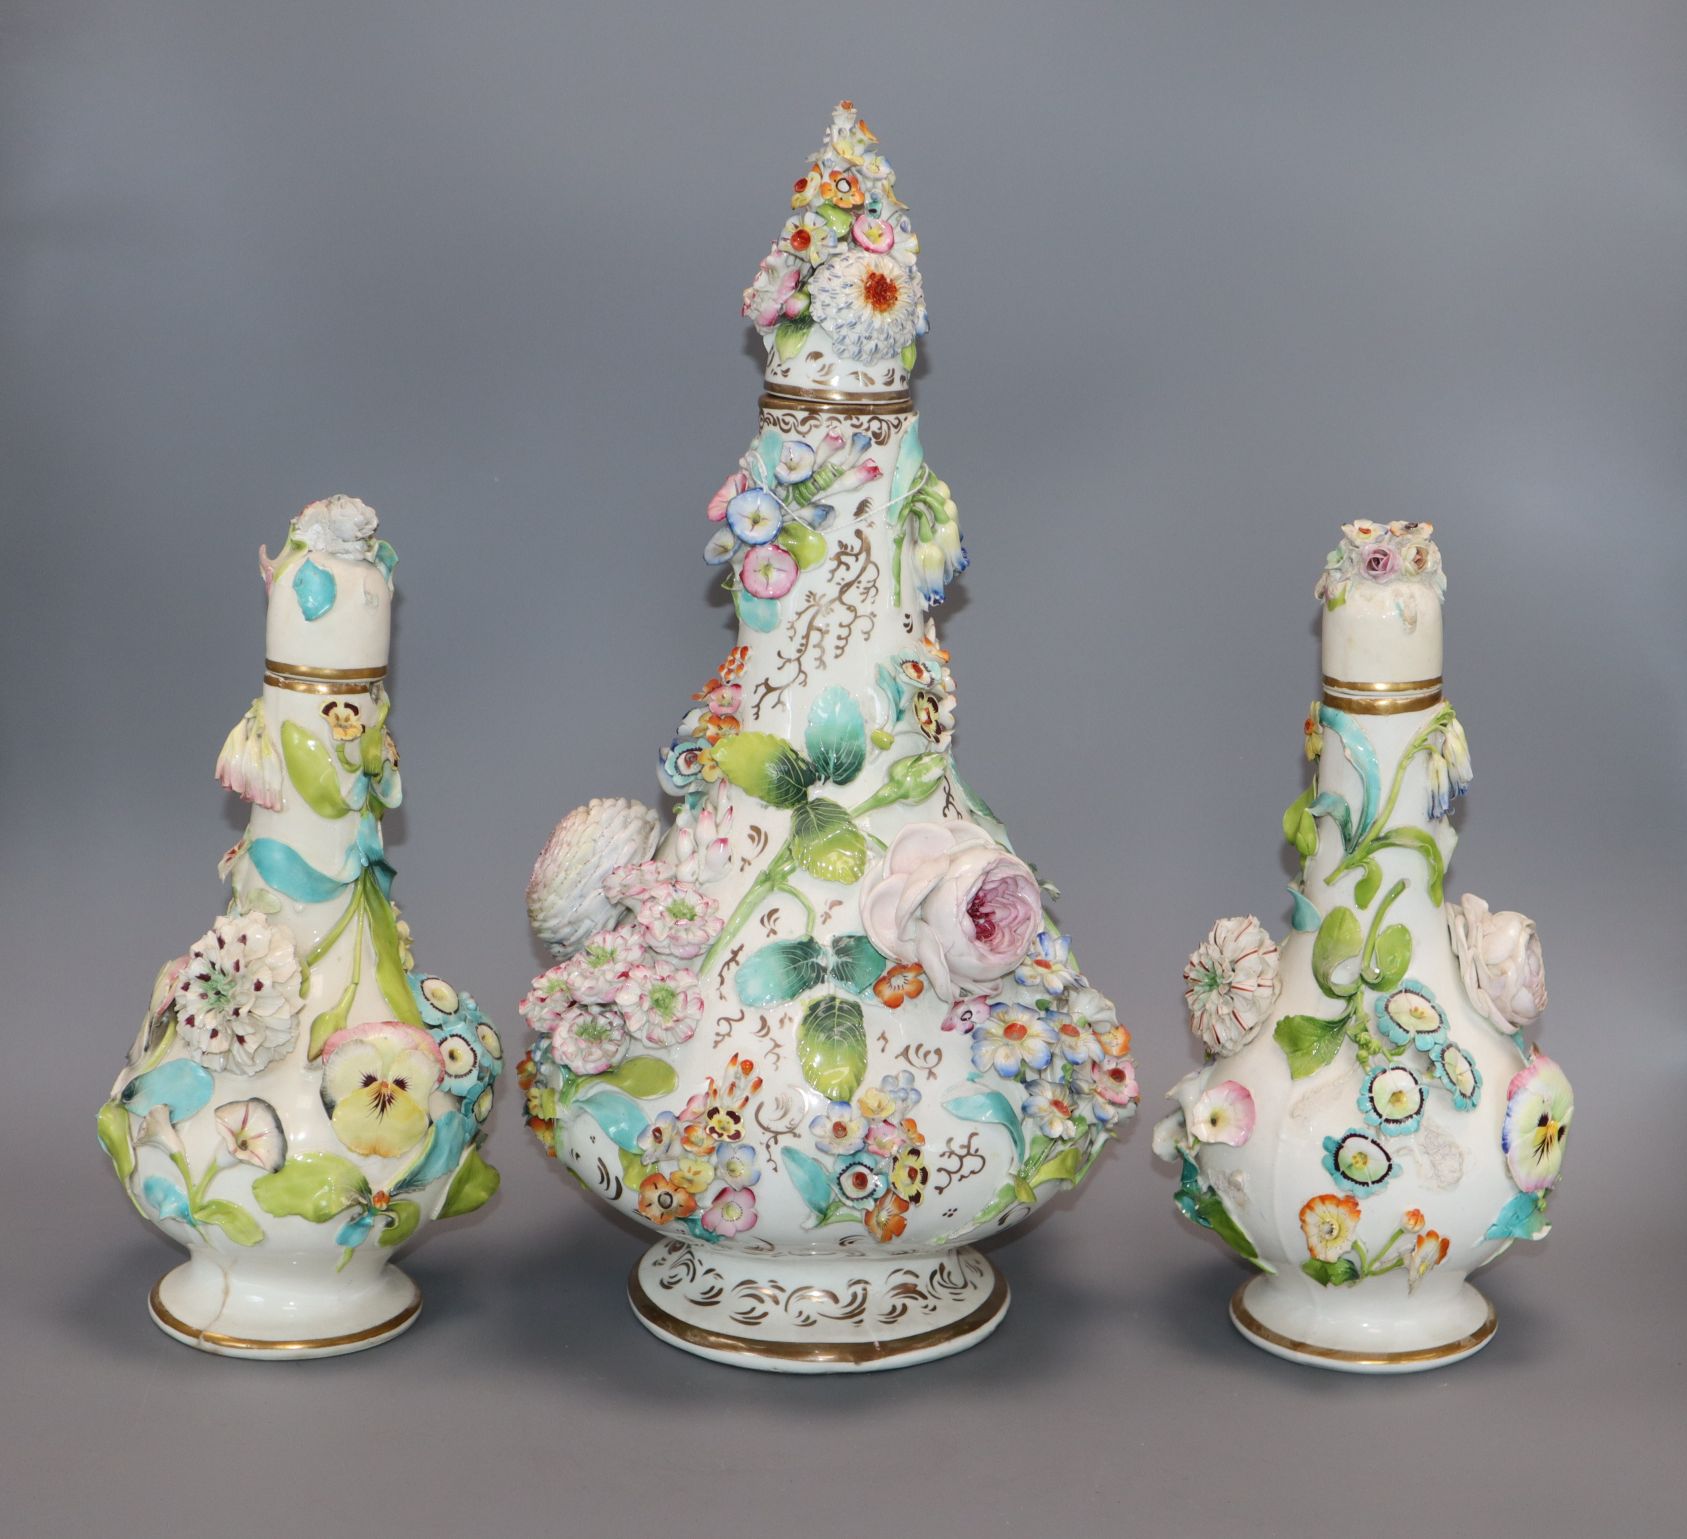 Three English porcelain flower encrusted scent bottles and covers, c. 1830-40, possibly - Image 2 of 11